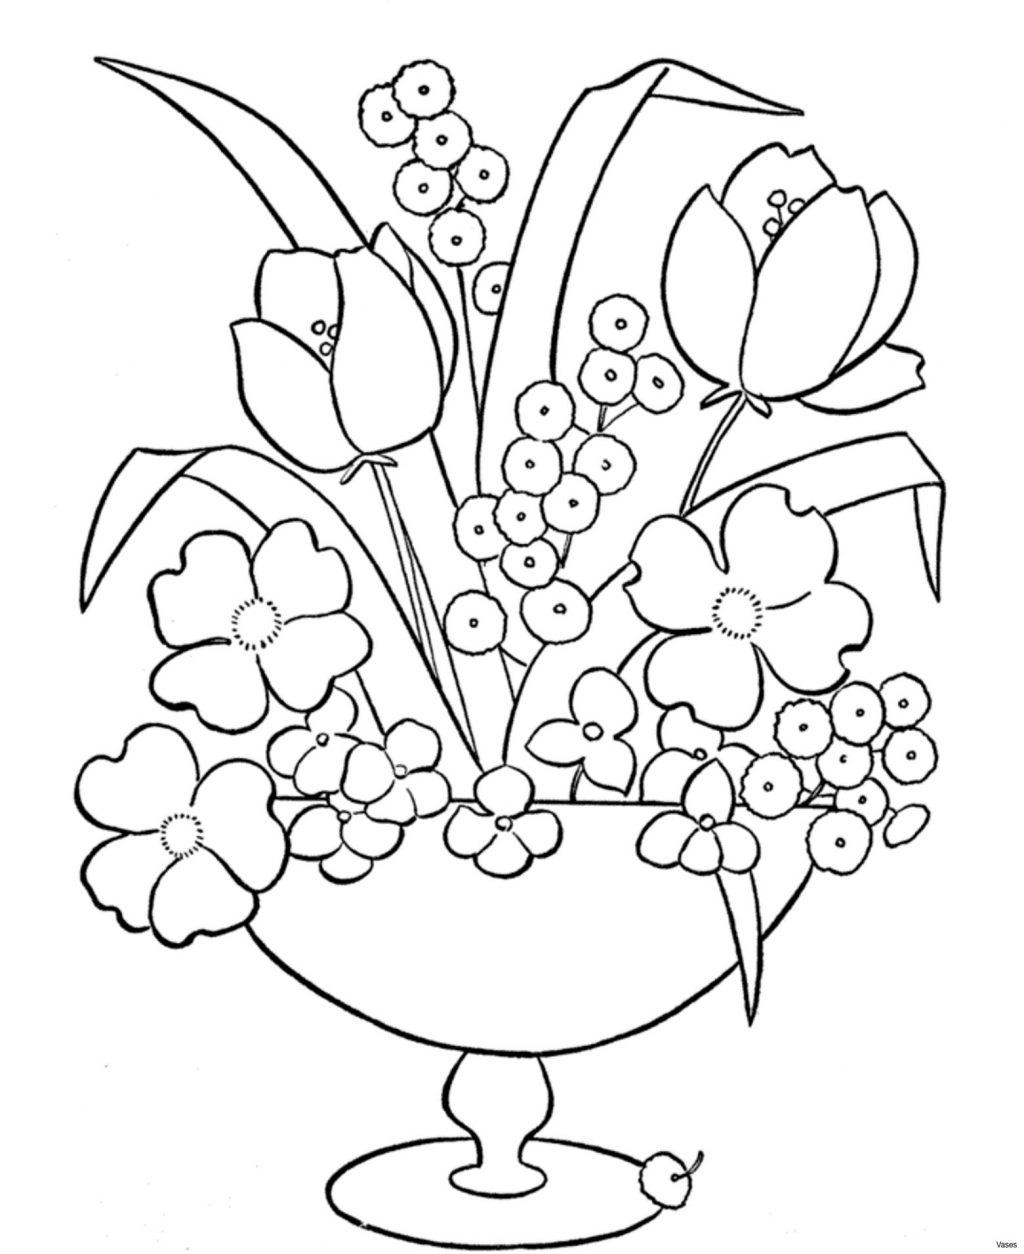 Pluto Coloring Pages Coloring Book Outstanding Pluto Coloring Pages